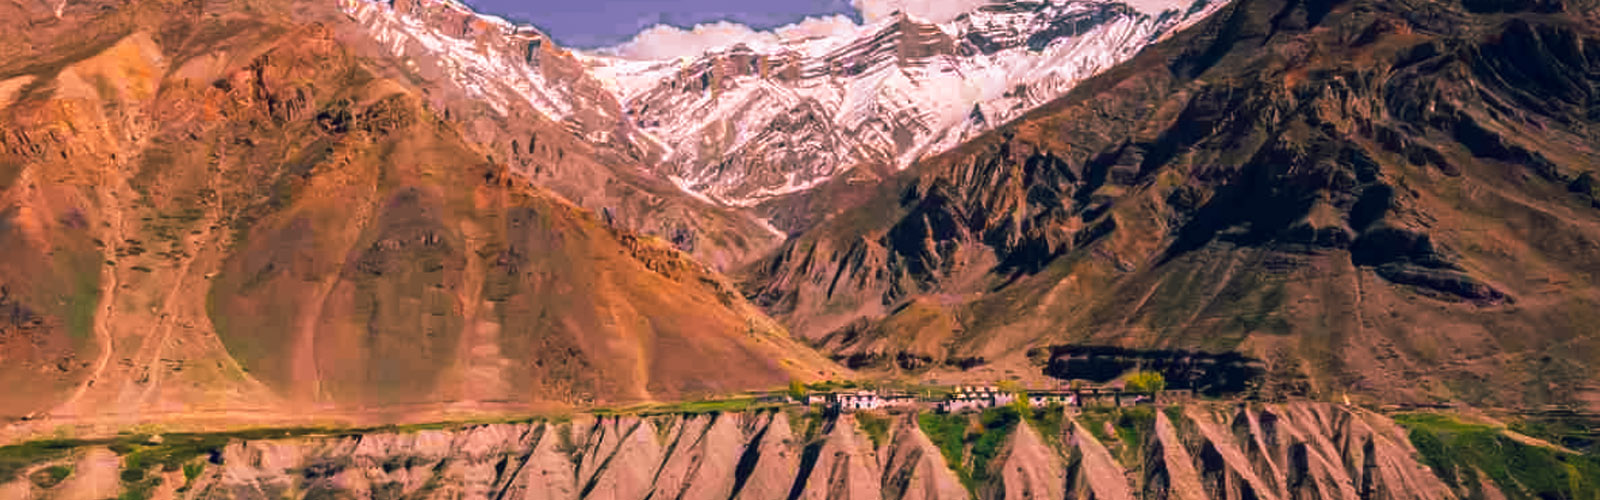 Pin Valley National Park Spiti valley